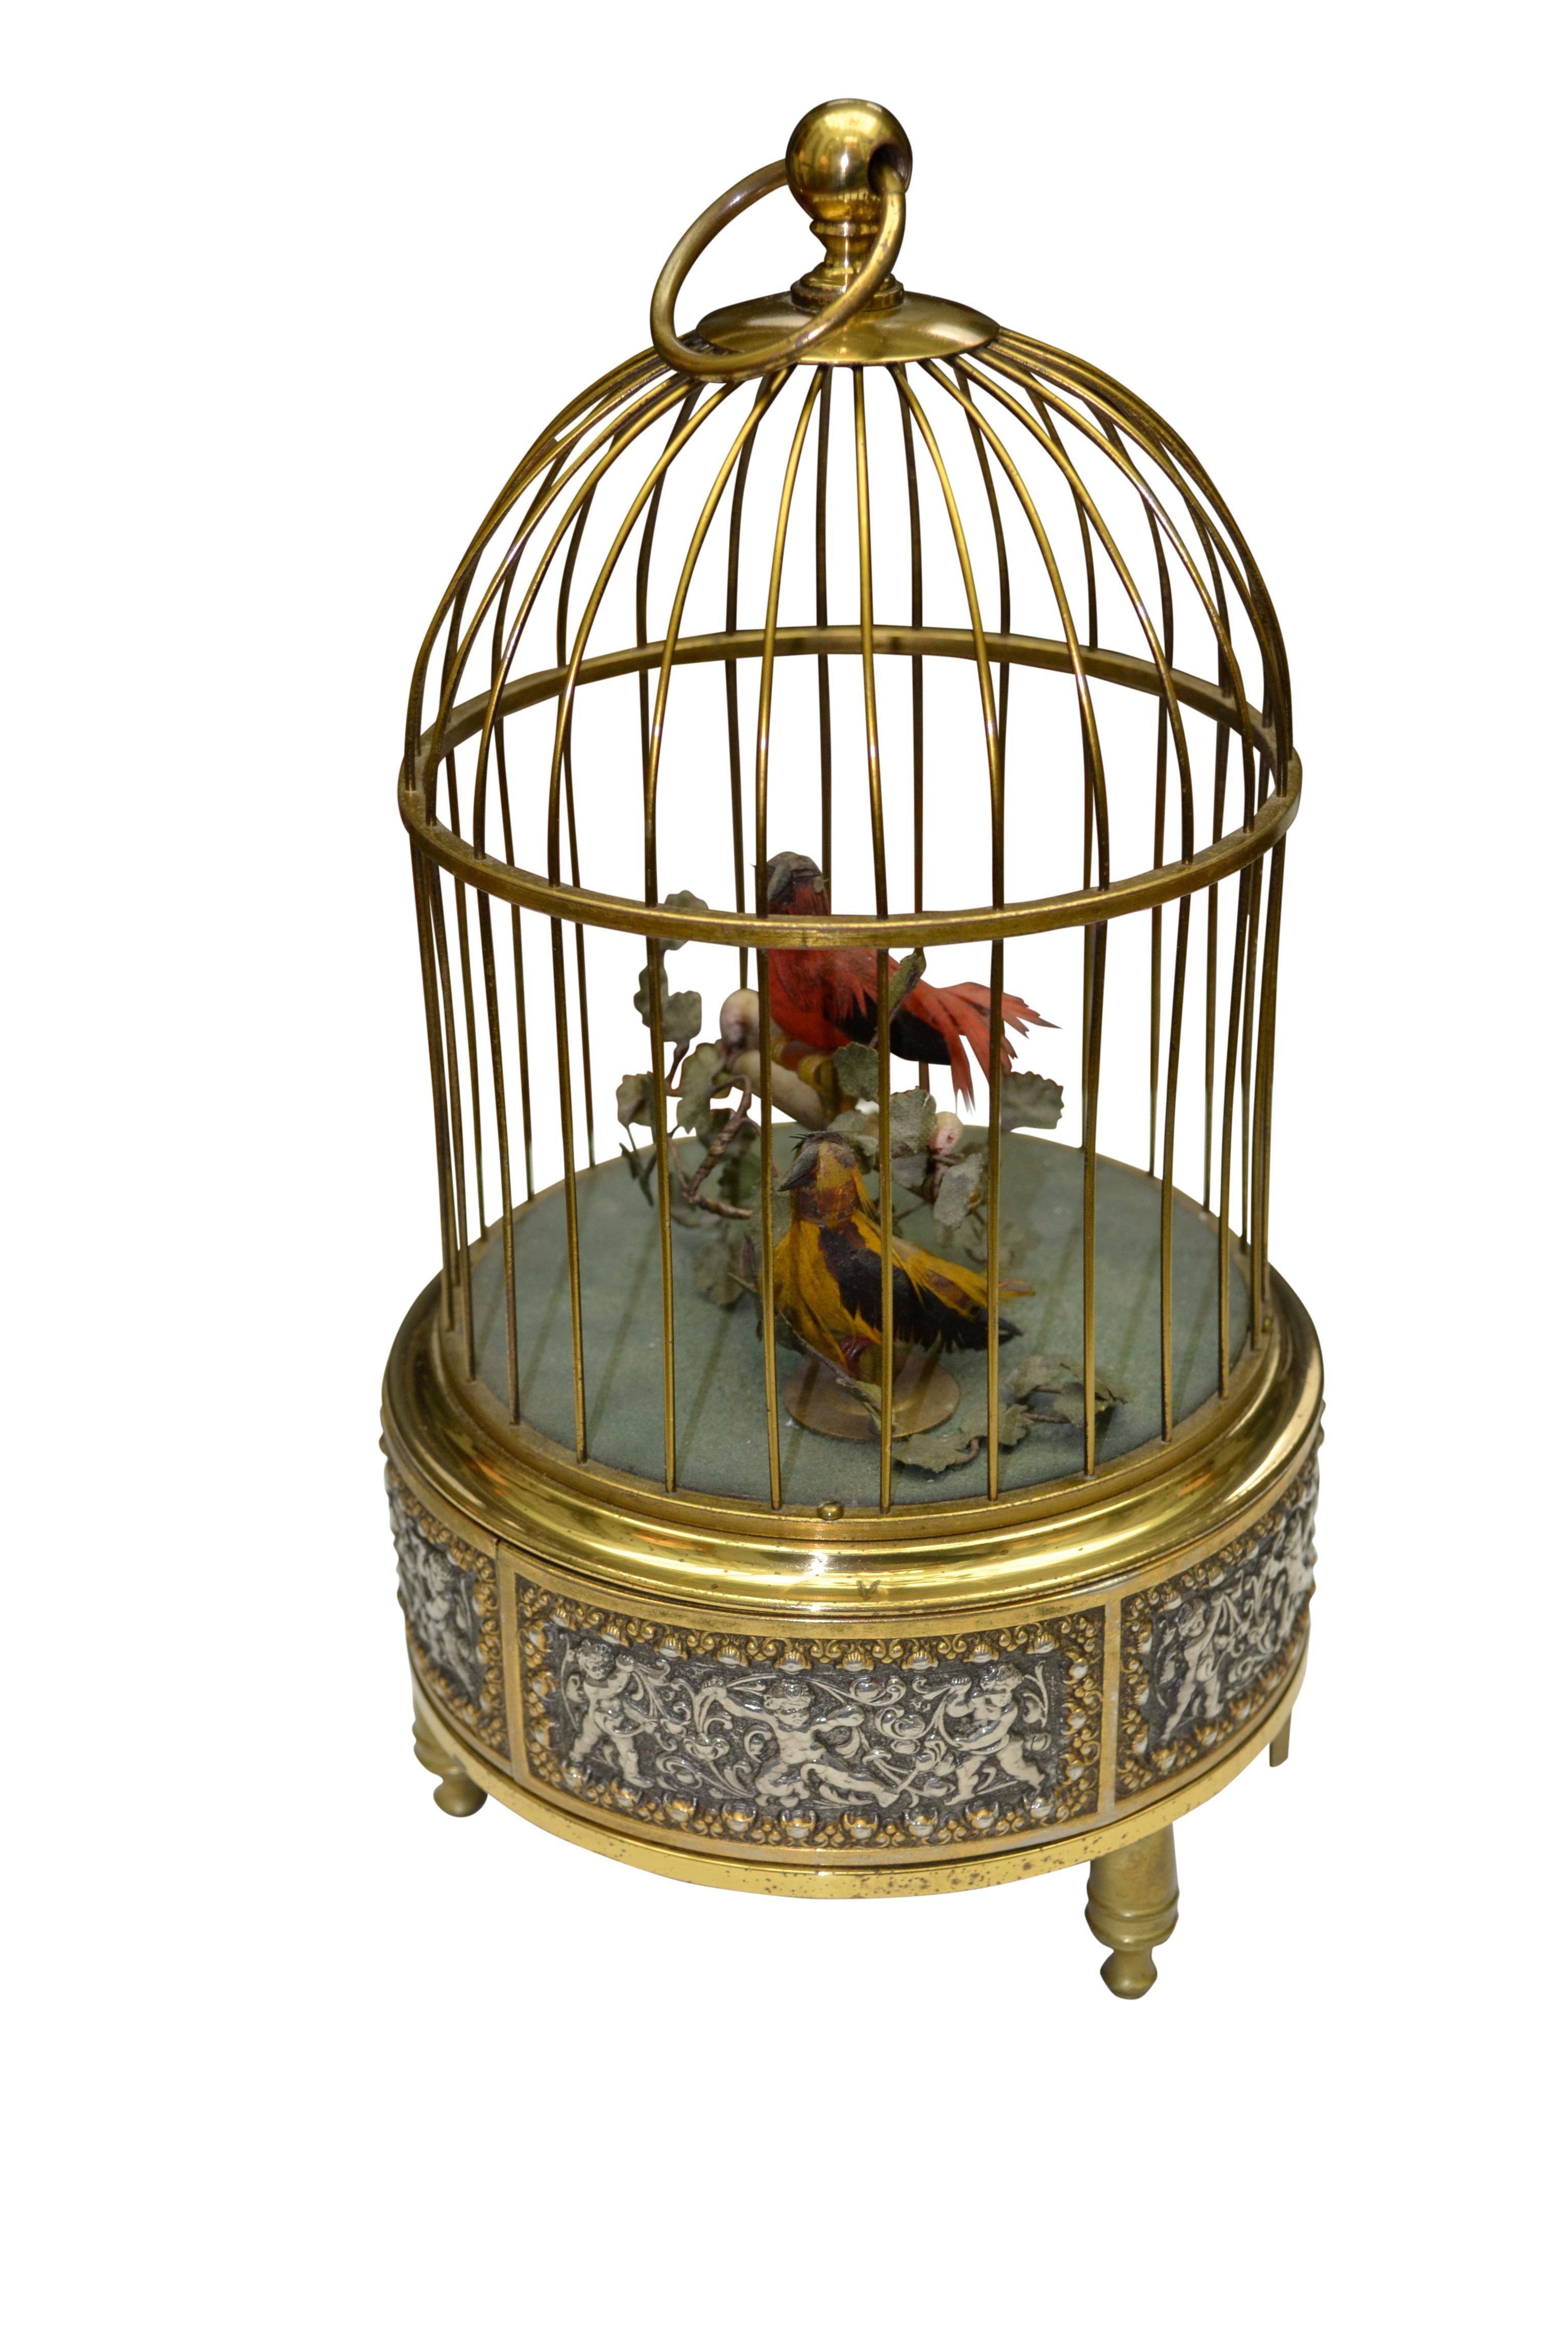 A brass wire cage with knob finial and loop handle; set on a slivered brass base with an ornate repousse frieze of frolicking putti; the whole supported by three turned brass feet; the interior has 2 animated manually feathered singing birds, one